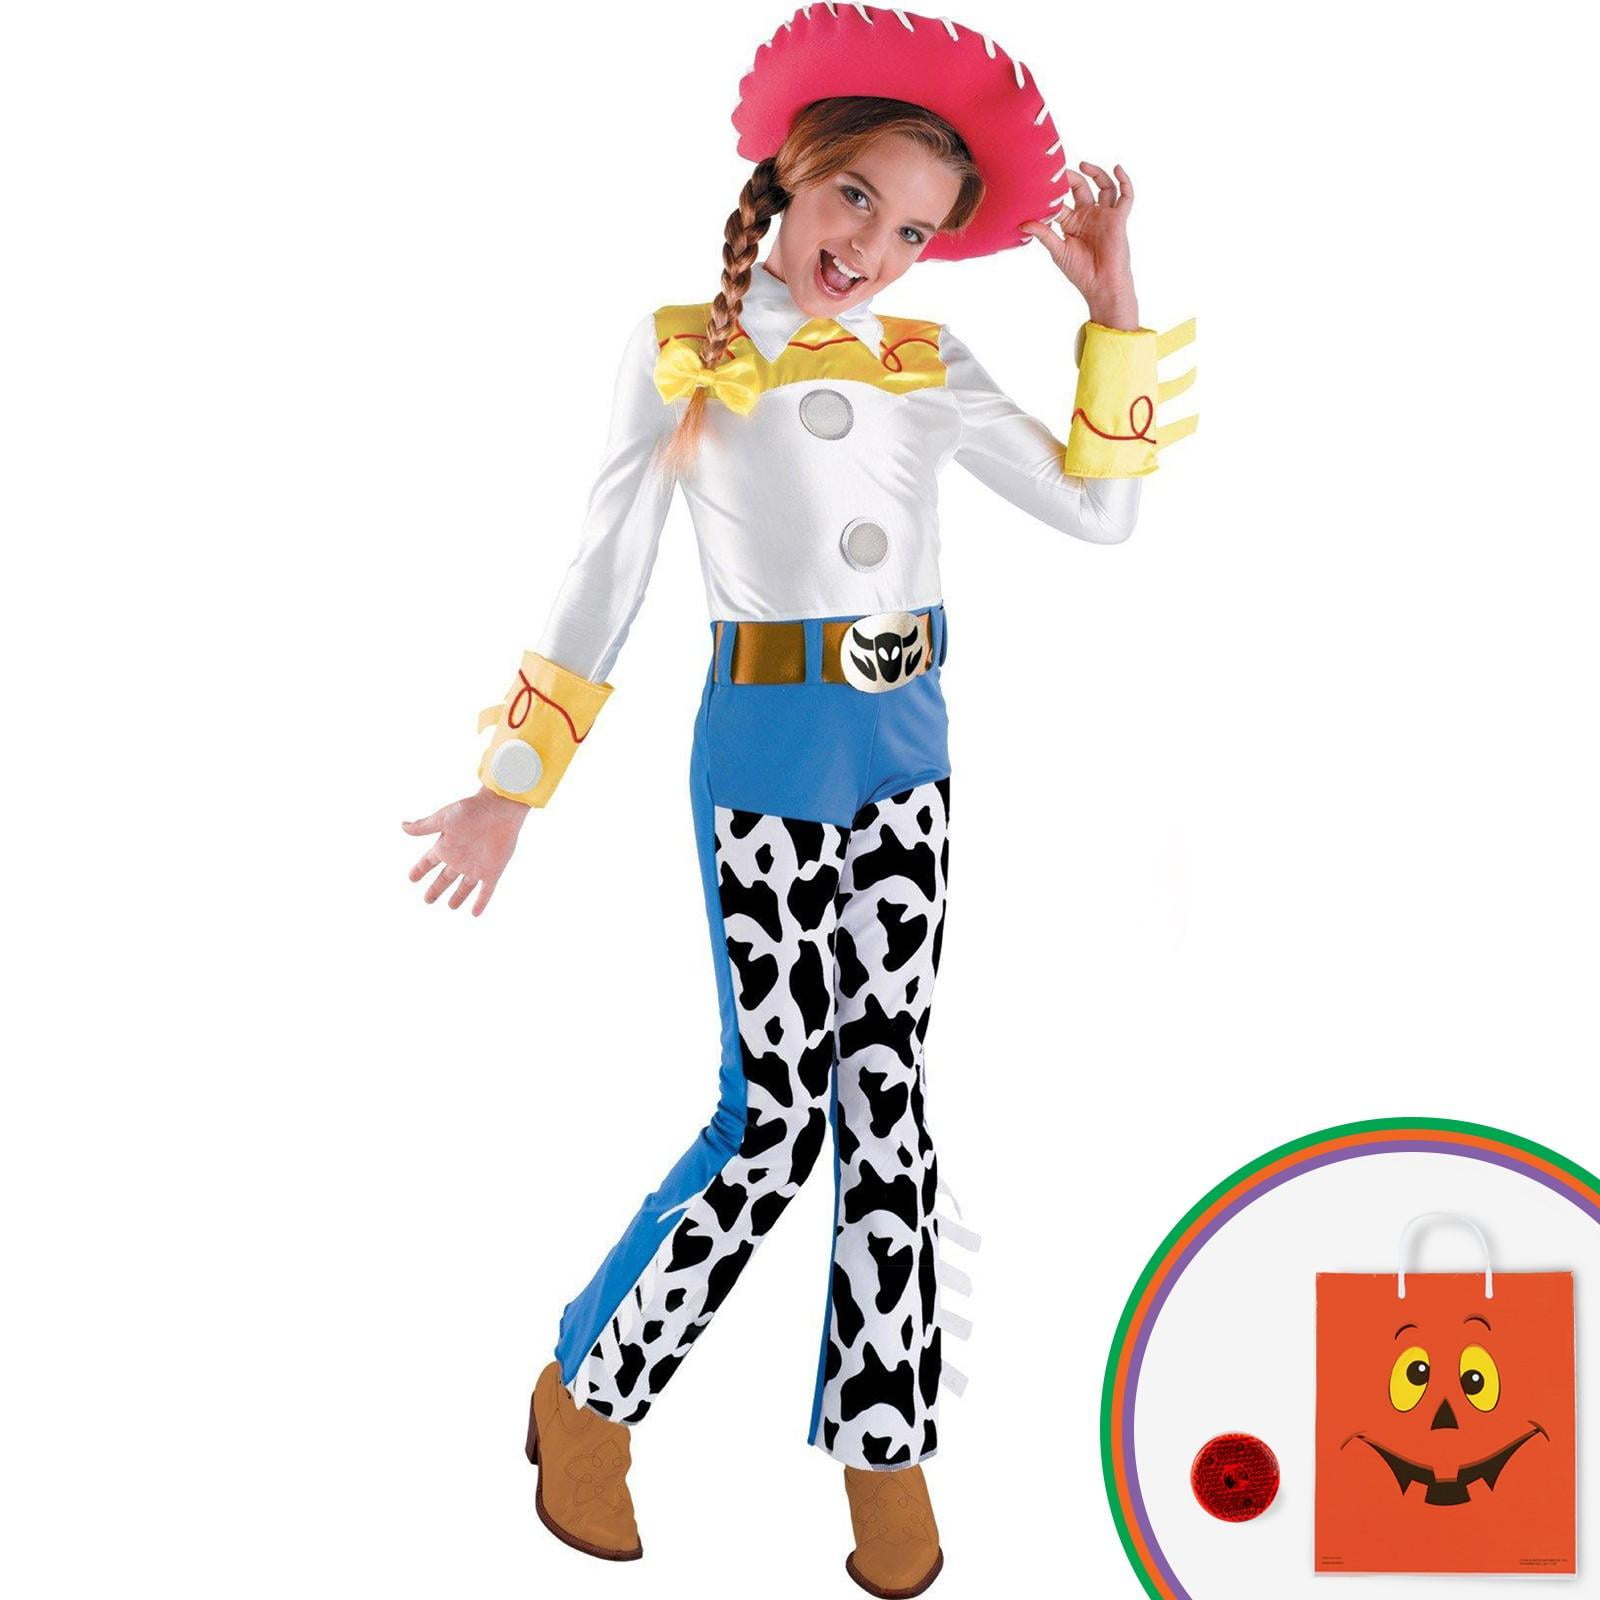 Toy Story- Jessie Deluxe Child Costume Kit with Free Gift - Walmart.com